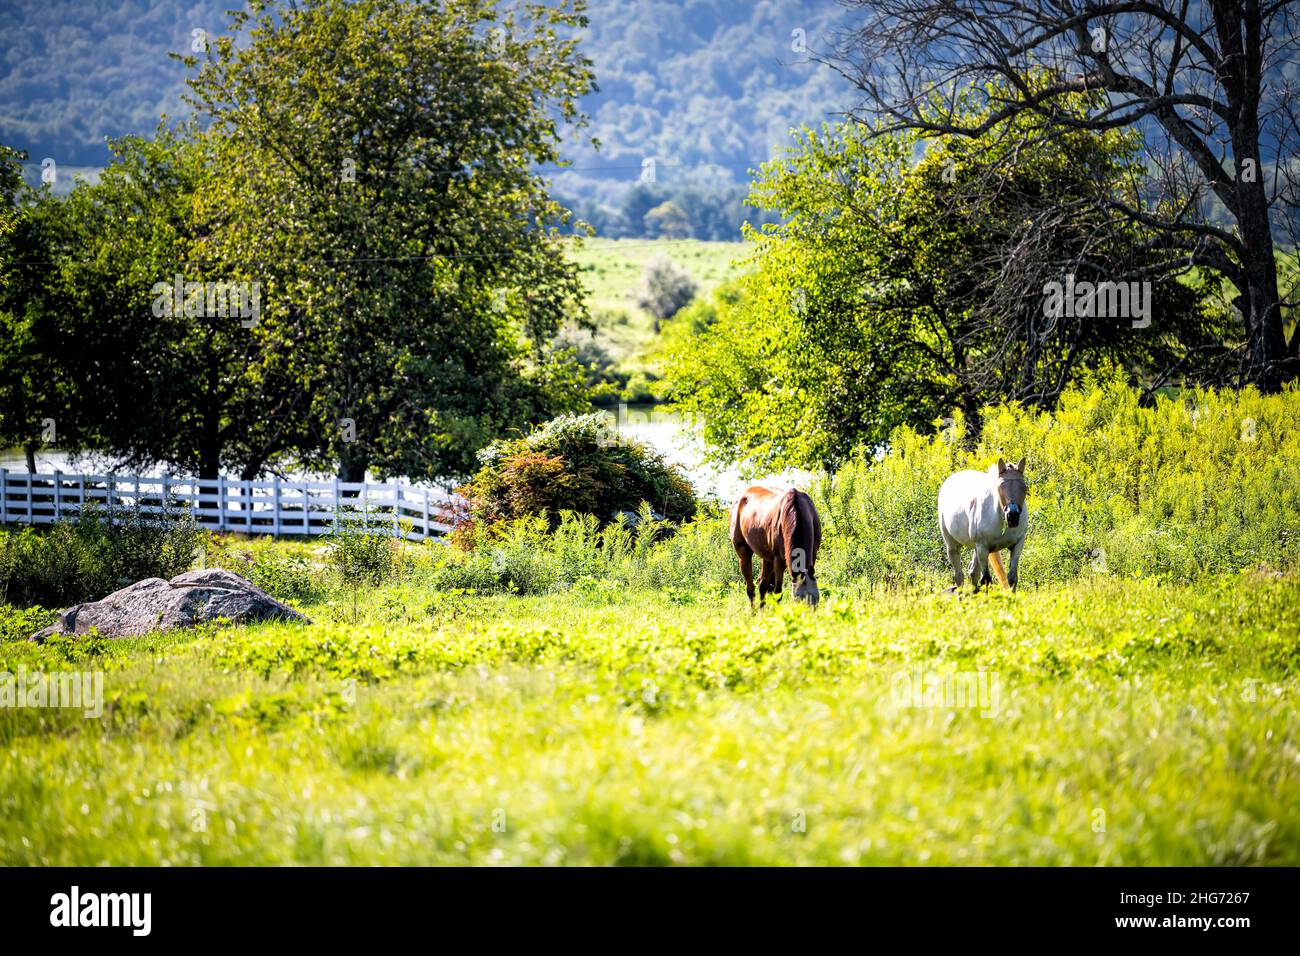 Evening or morning farm field with horses wearing mask grazing at pastoral rural countryside in Virginia, USA with white picket fence and lake trees i Stock Photo